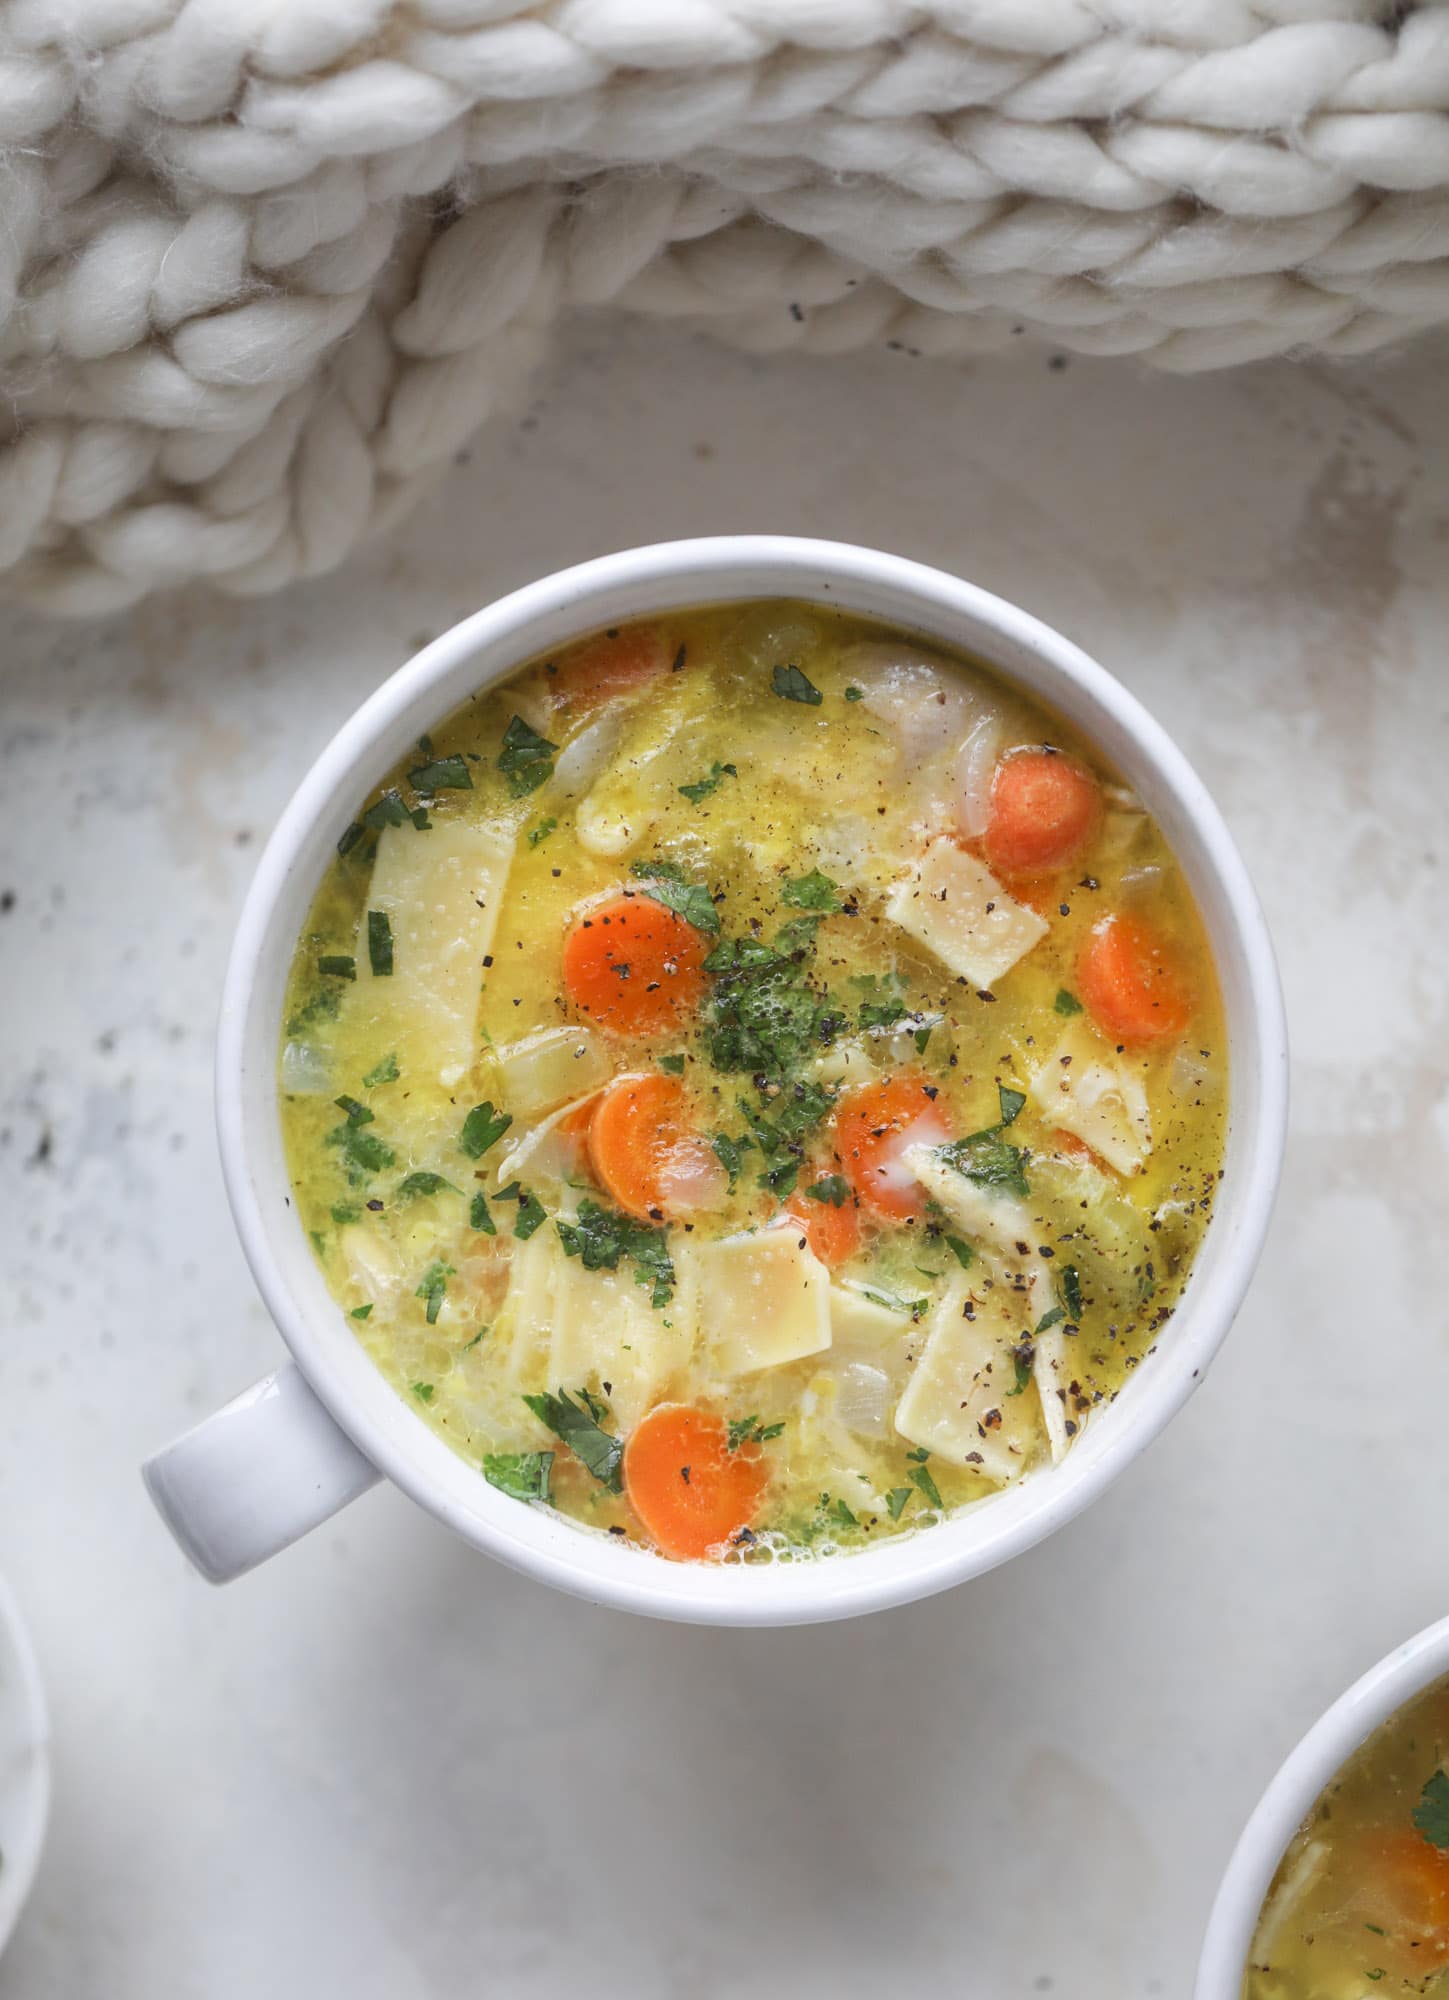 This chicken noodle egg drop soup is the ultimate comfort food! Homemade stock and satisfying ingredients provide the best nourishment and comfort! I howsweeteats.com #chicken #noodlesoup